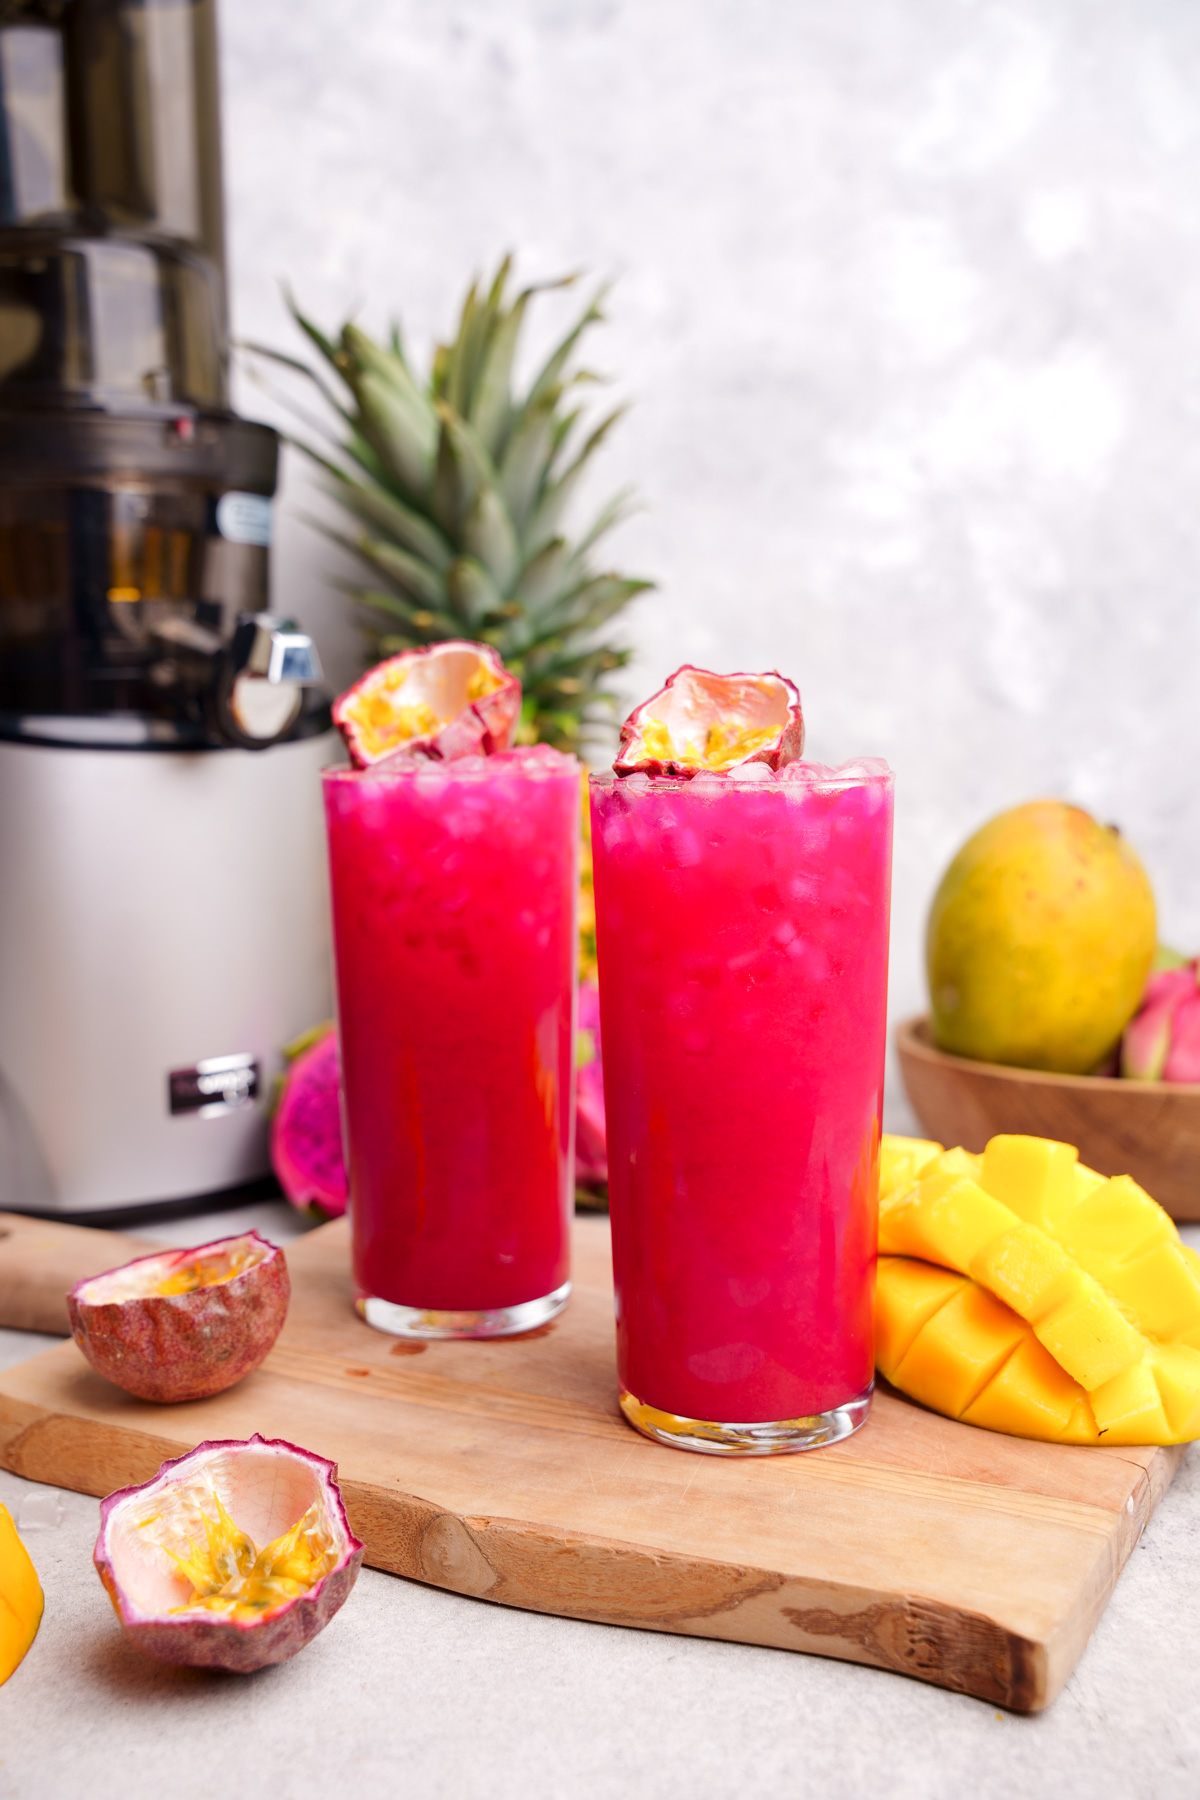 the tall glasses of tropical fruit juice garnished with a fresh passion fruit